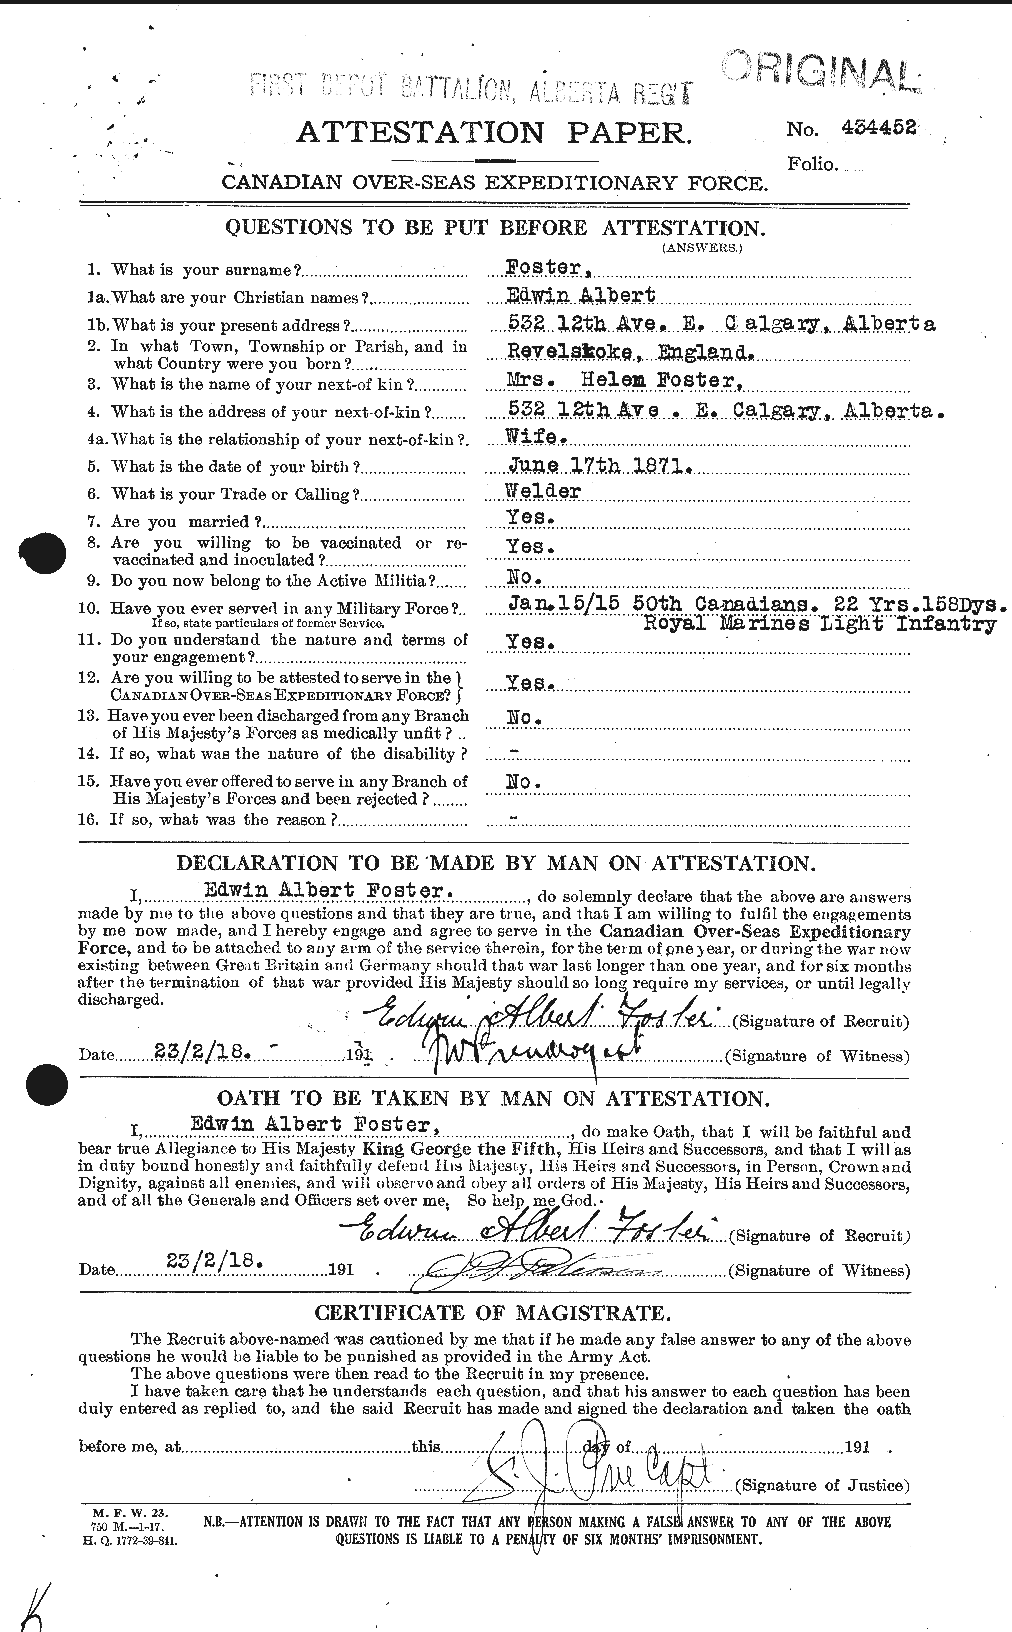 Personnel Records of the First World War - CEF 330590a